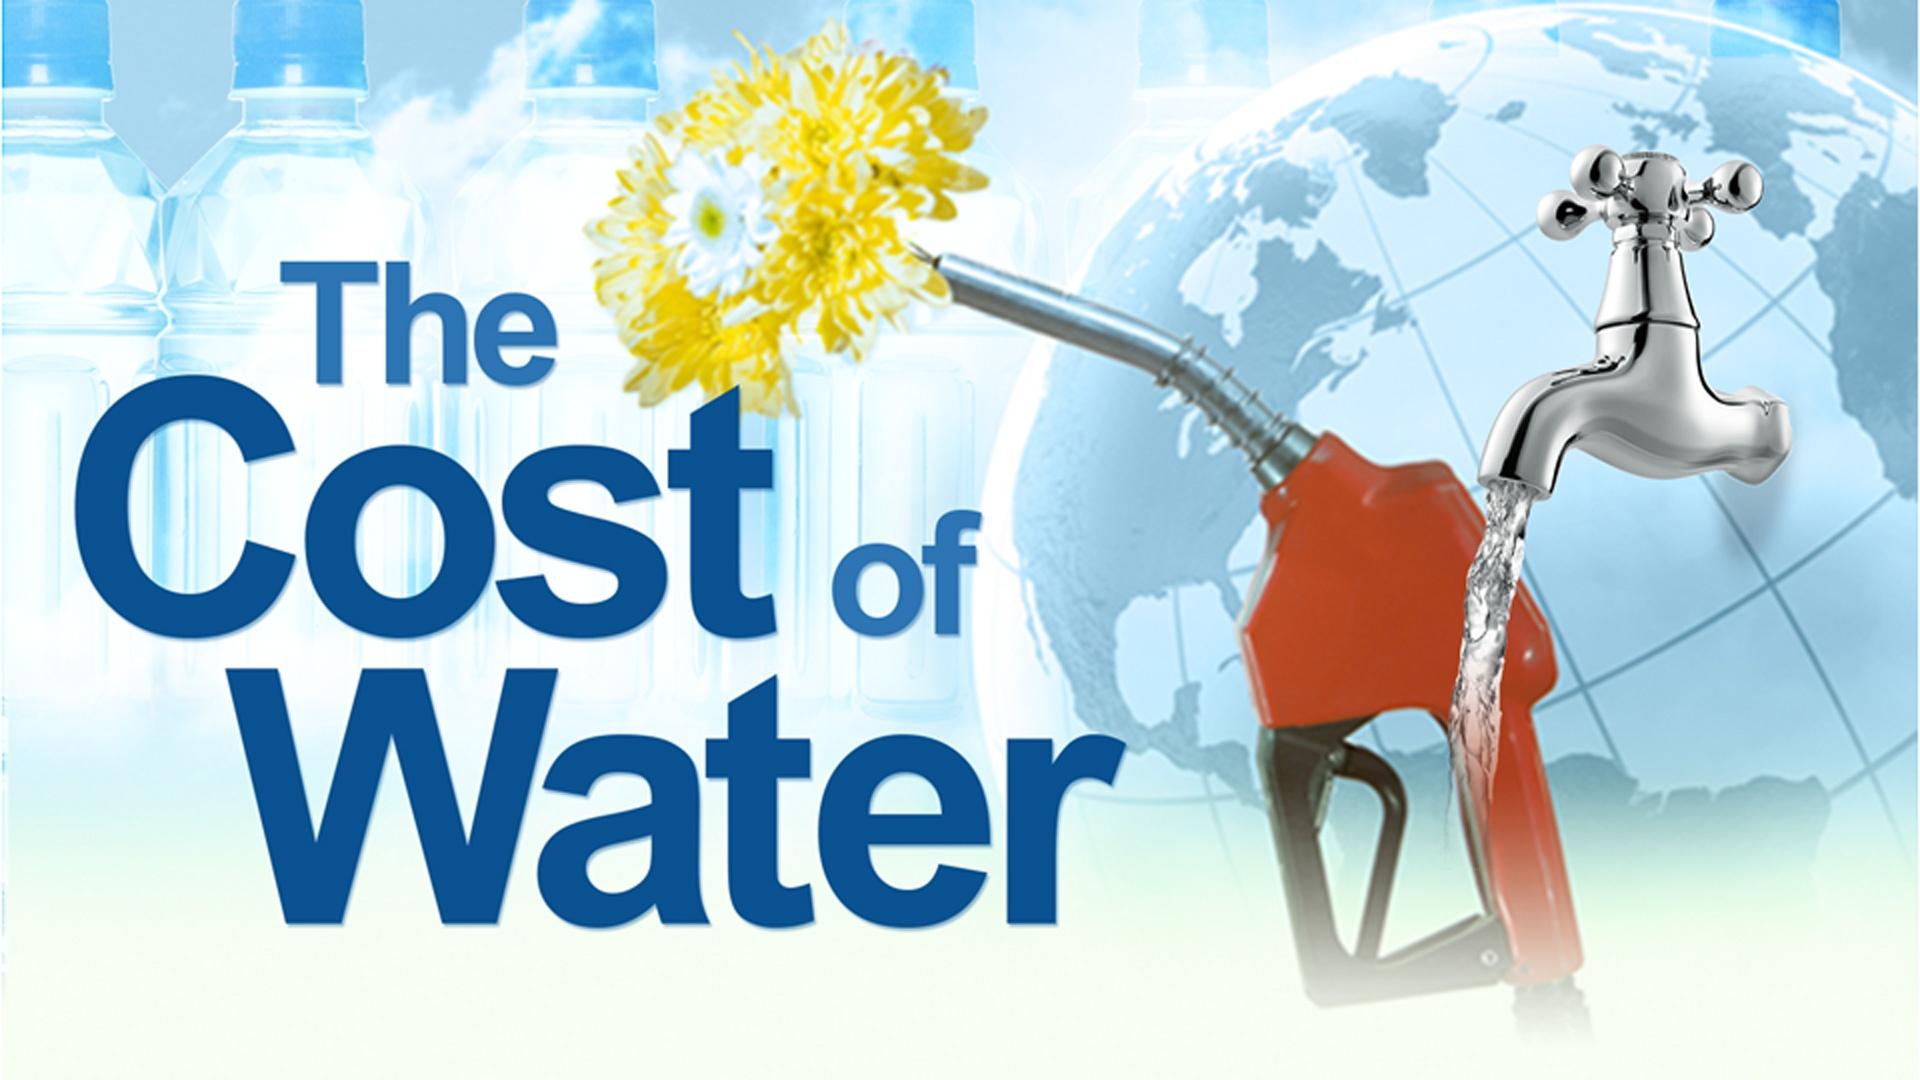 https://image.pbs.org/poster_images/assets/costofwater-poster-image.jpg